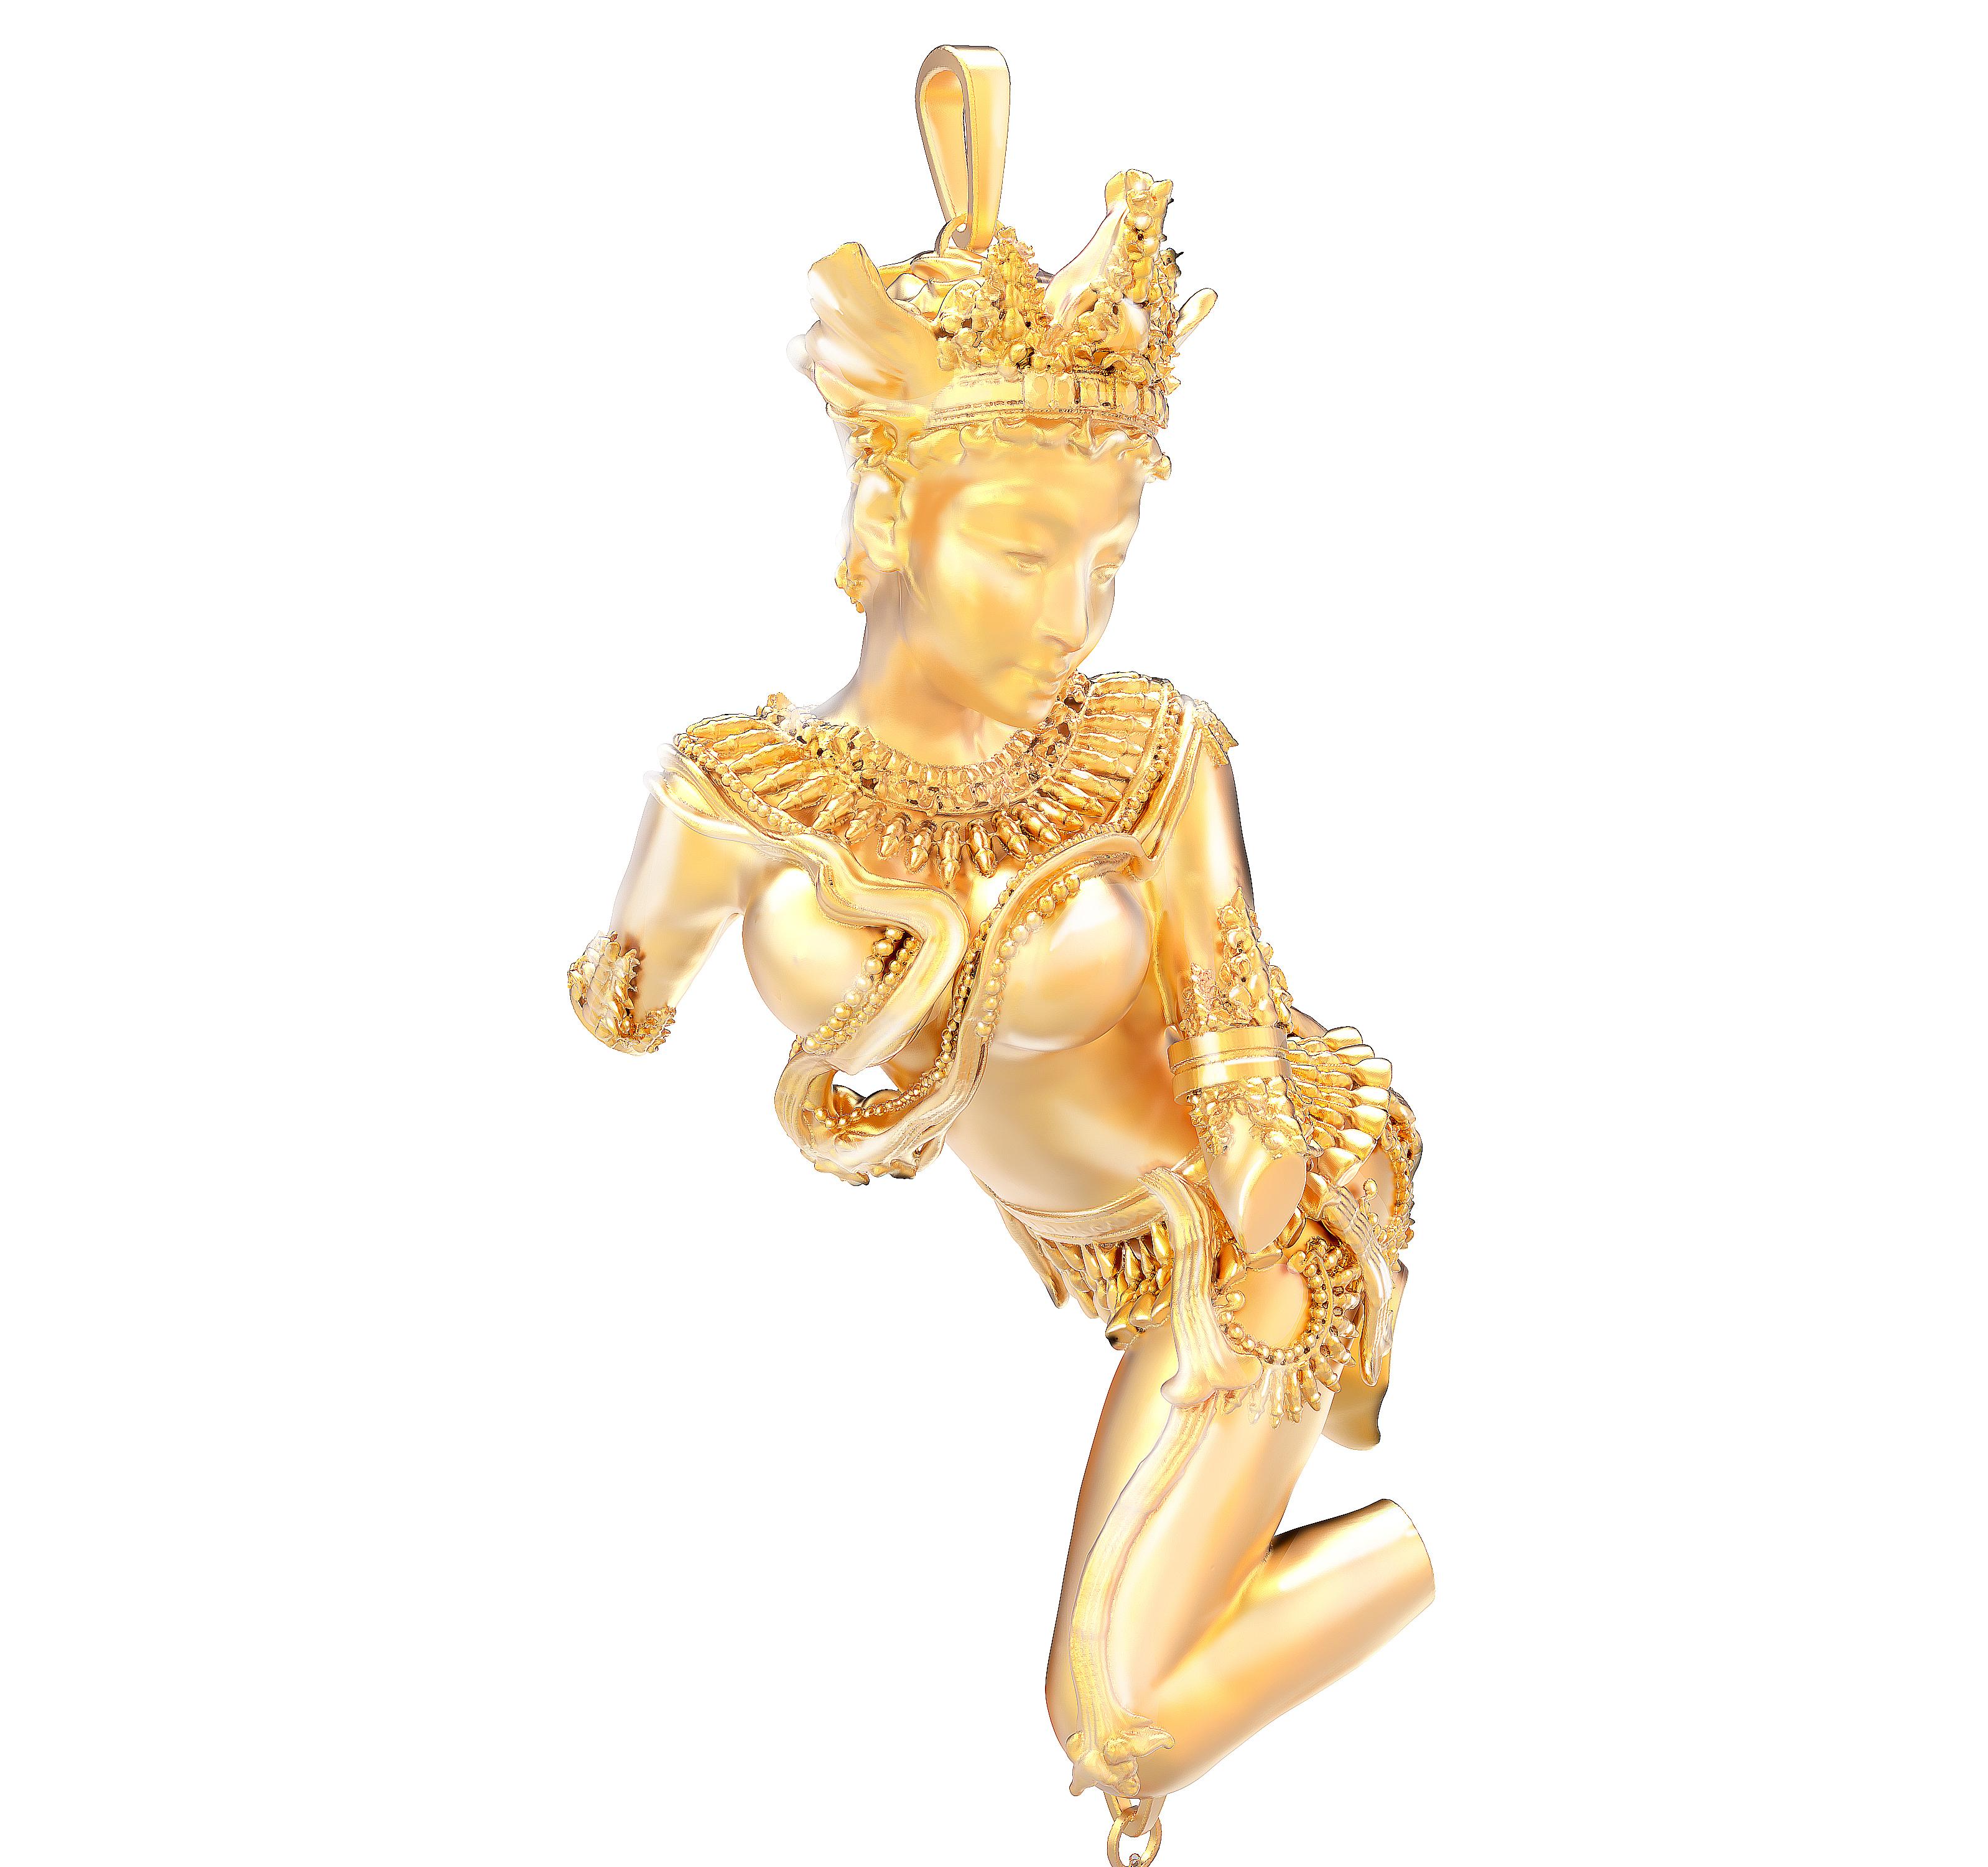 This Celestial Dancer Devata pendant necklace is made of 18 karat yellow gold with oval cut neon copper bearing water-pool paraiba tourmaline (2,4 carats, visually bigger). The weight of the gold is approximately 30 gr.

It was designed by the